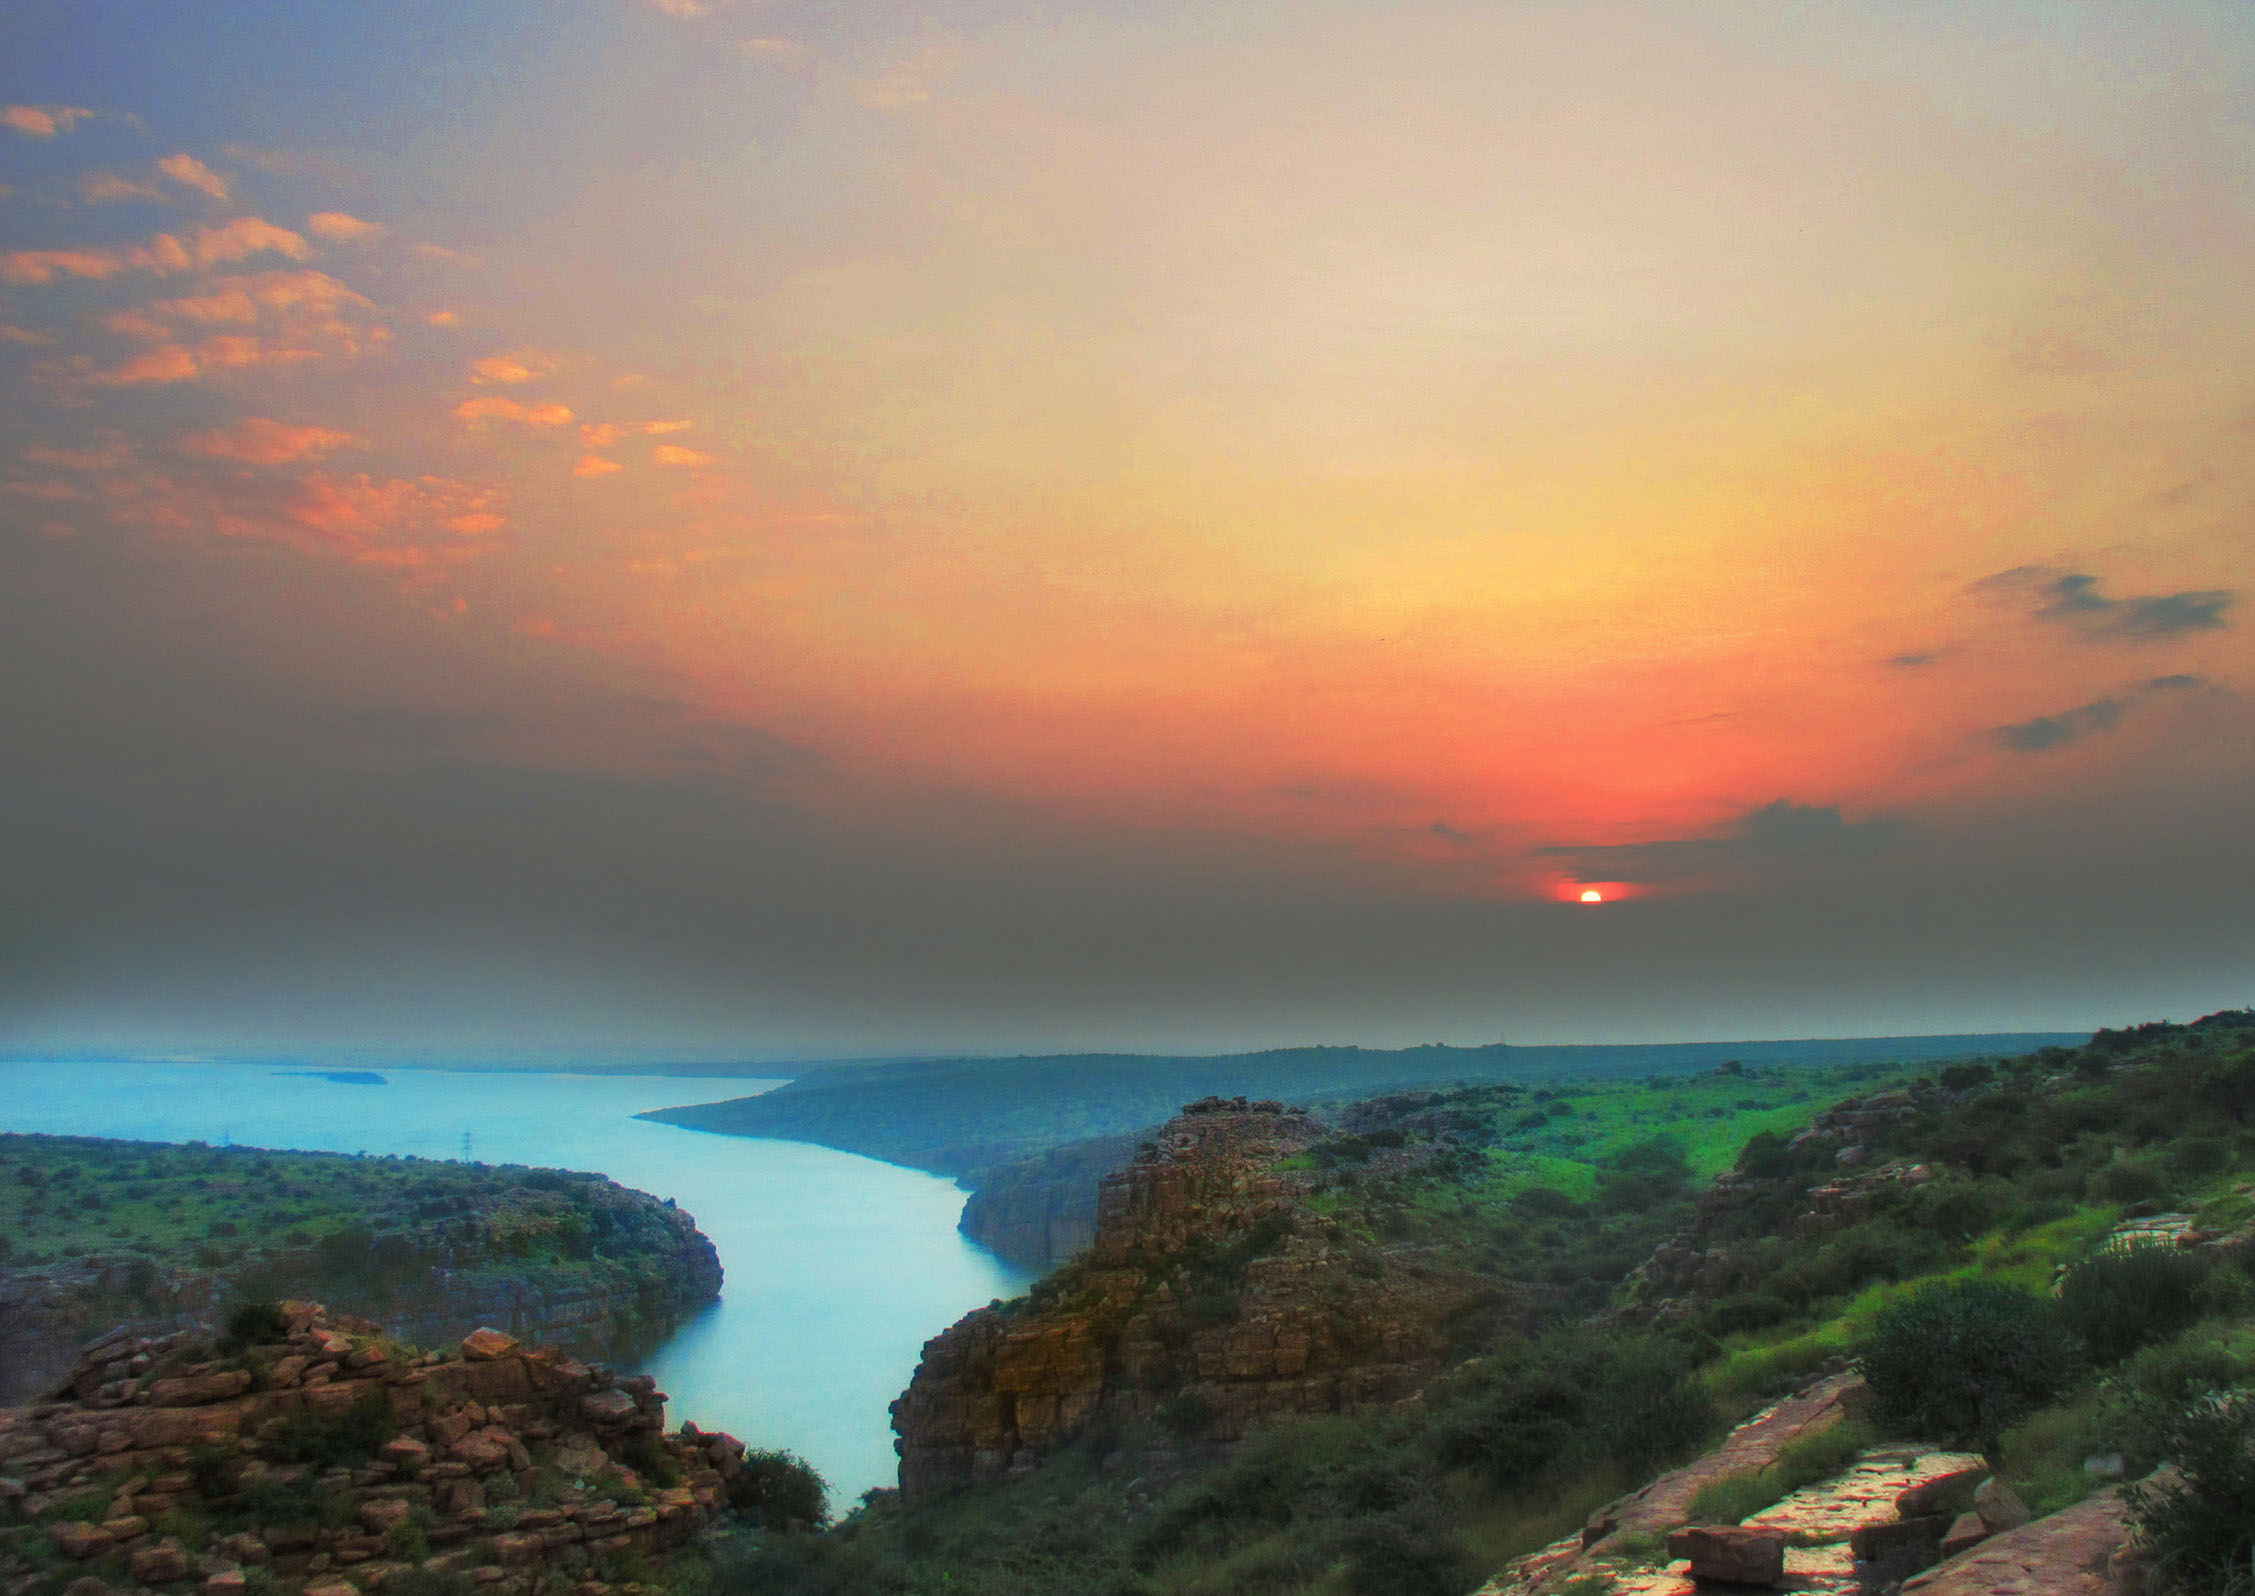 Sunrise at Gandikota canyon with mountains and river